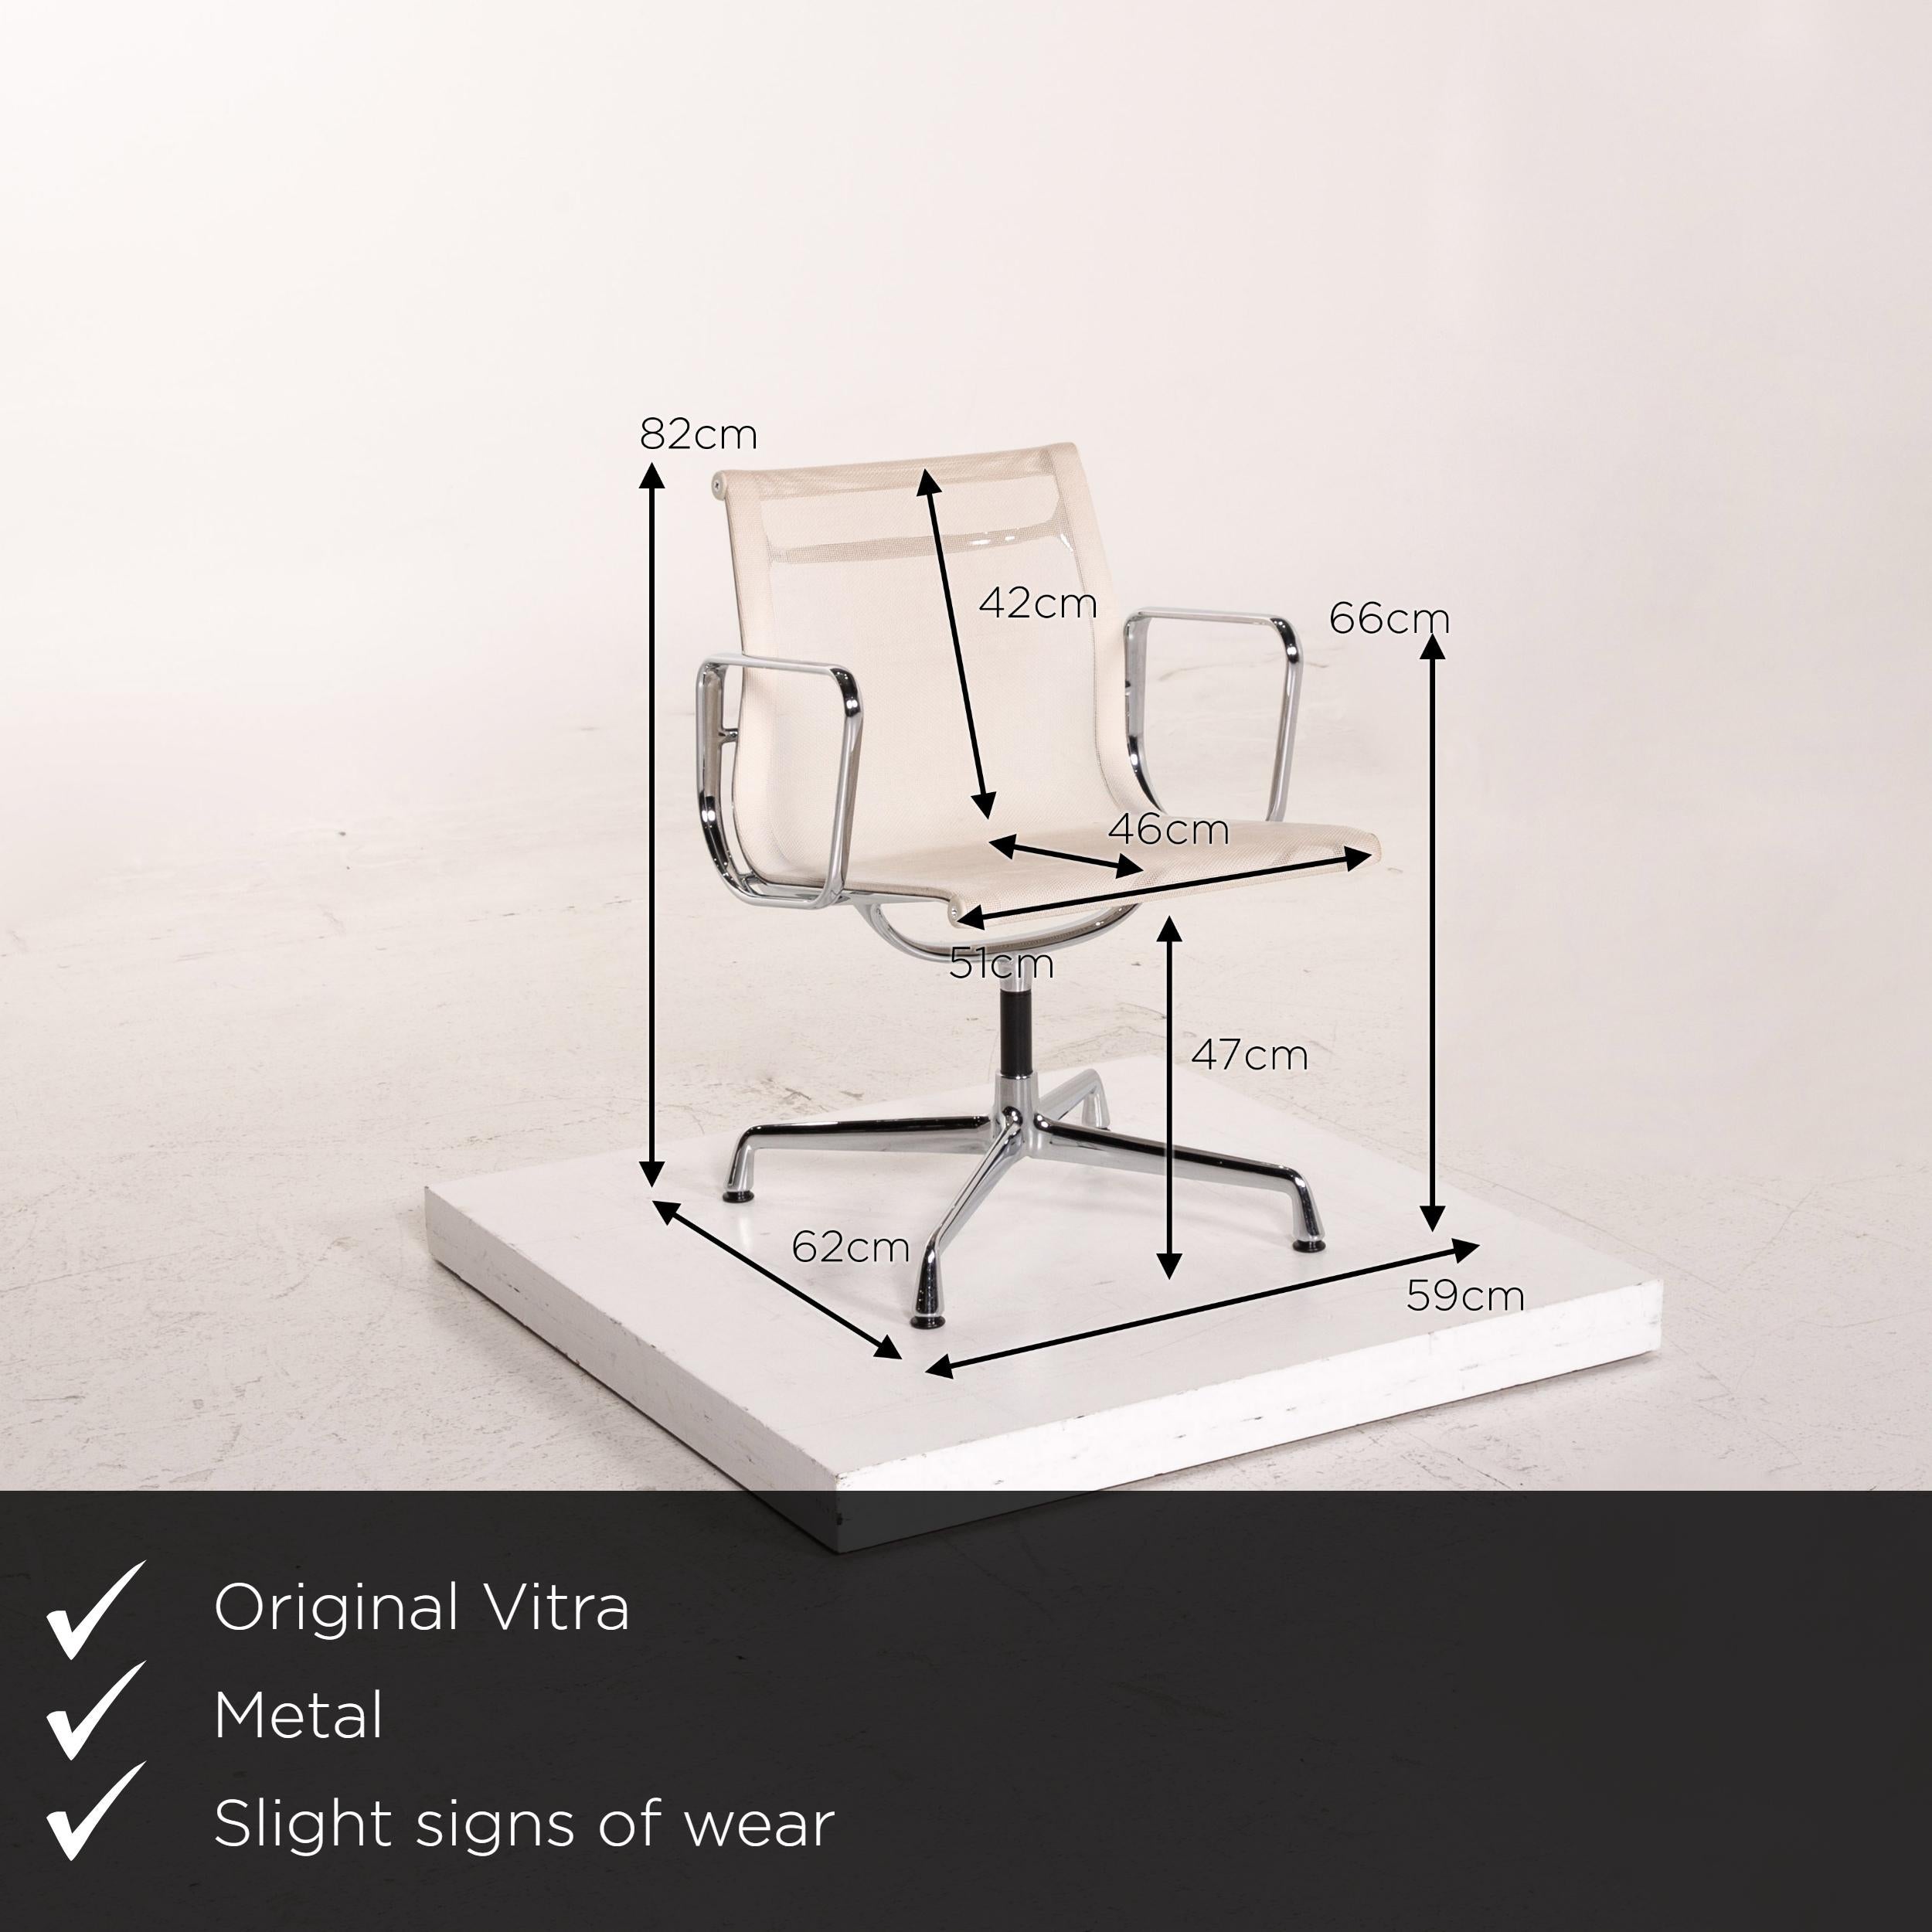 We present to you a Vitra EA 108 aluminum plastic chair cream swivel.
 

 Product measurements in centimeters:
 

Depth 62
Width 59
Height 82
Seat height 47
Rest height 66
Seat depth 46
Seat width 51
Back height 42.
 